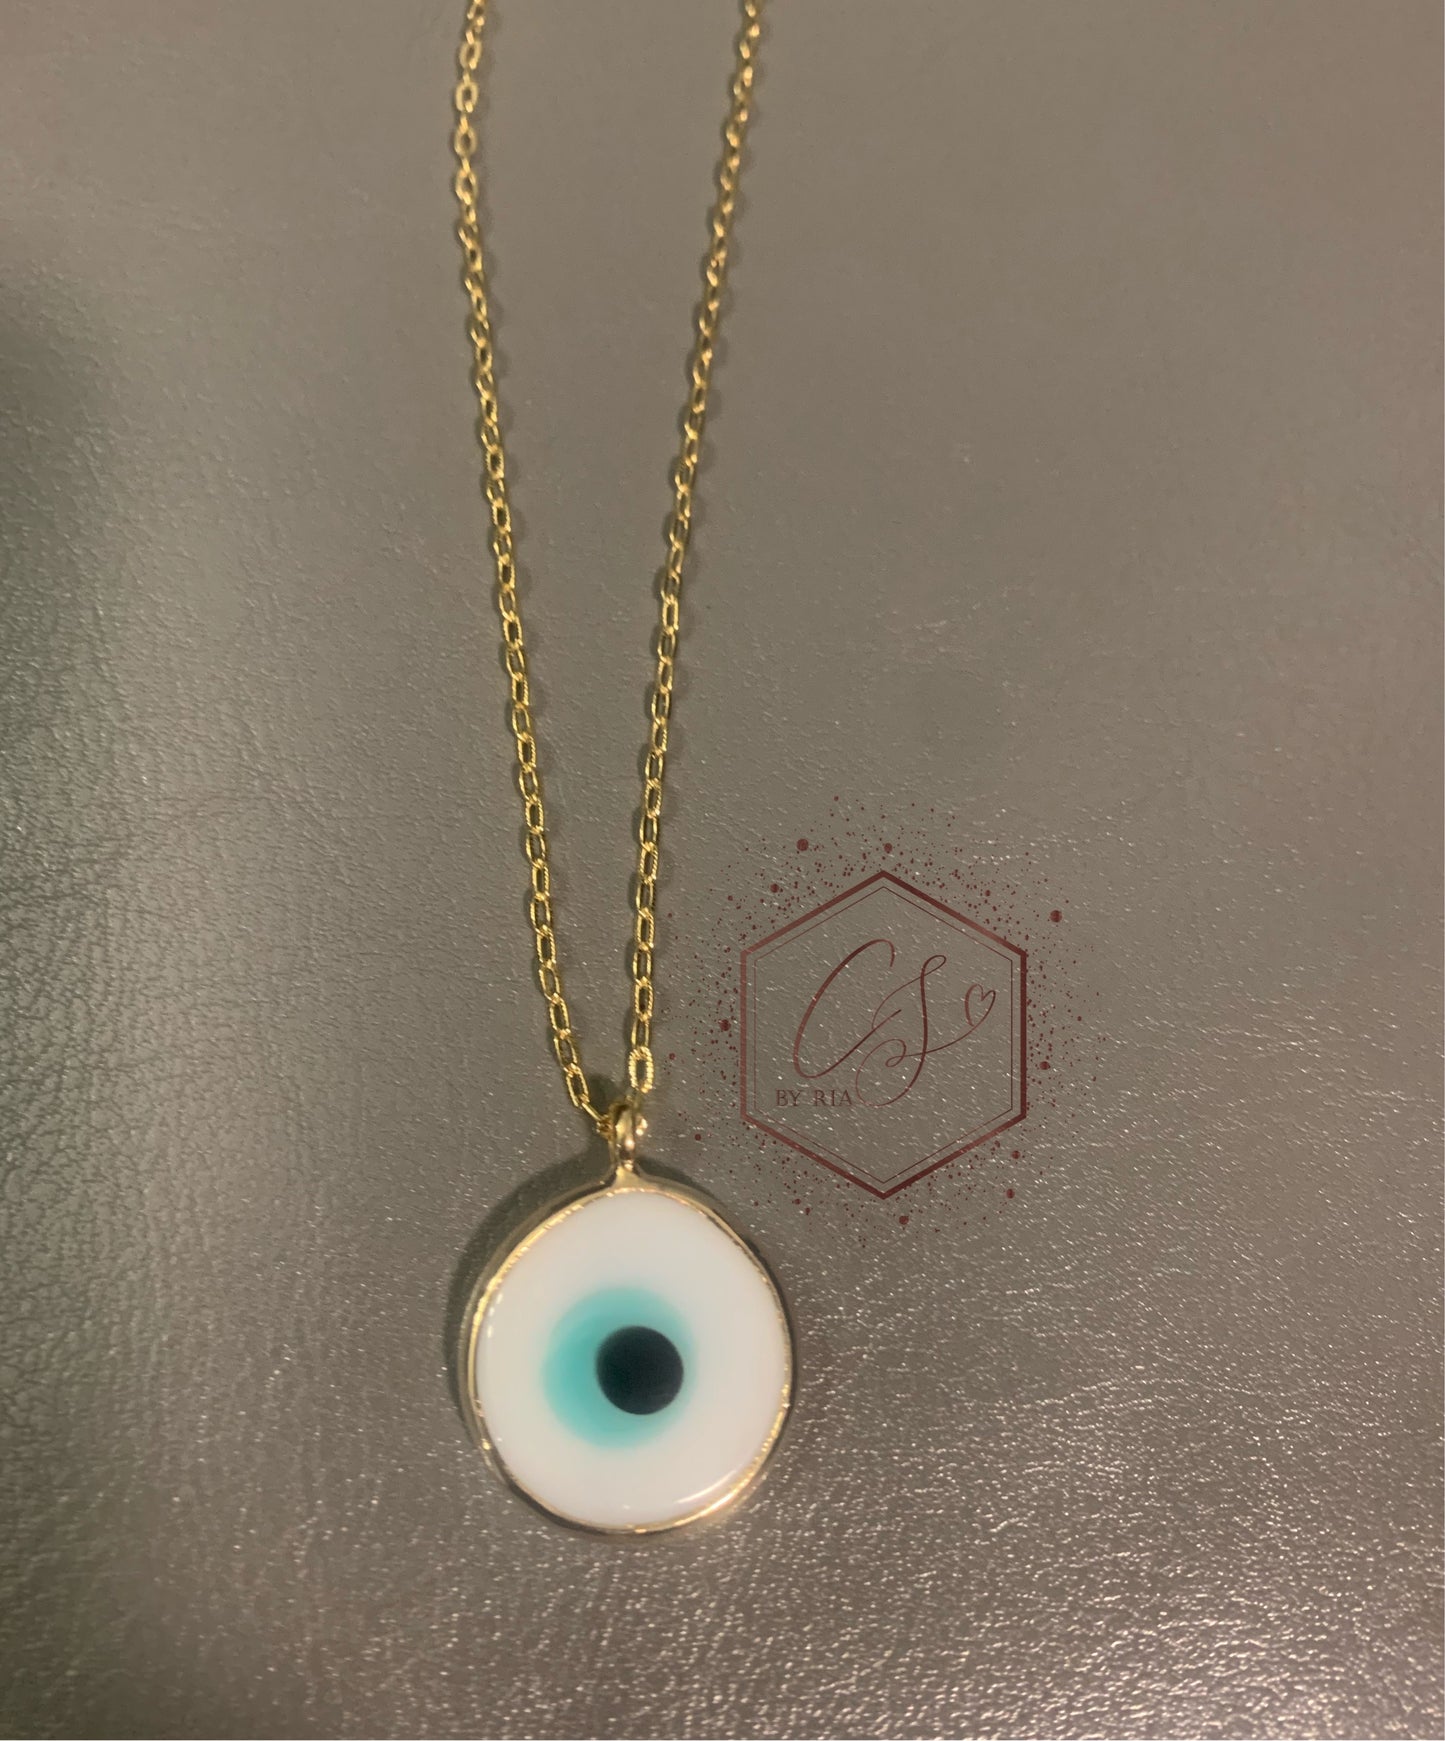 White and teal round evil eye necklace